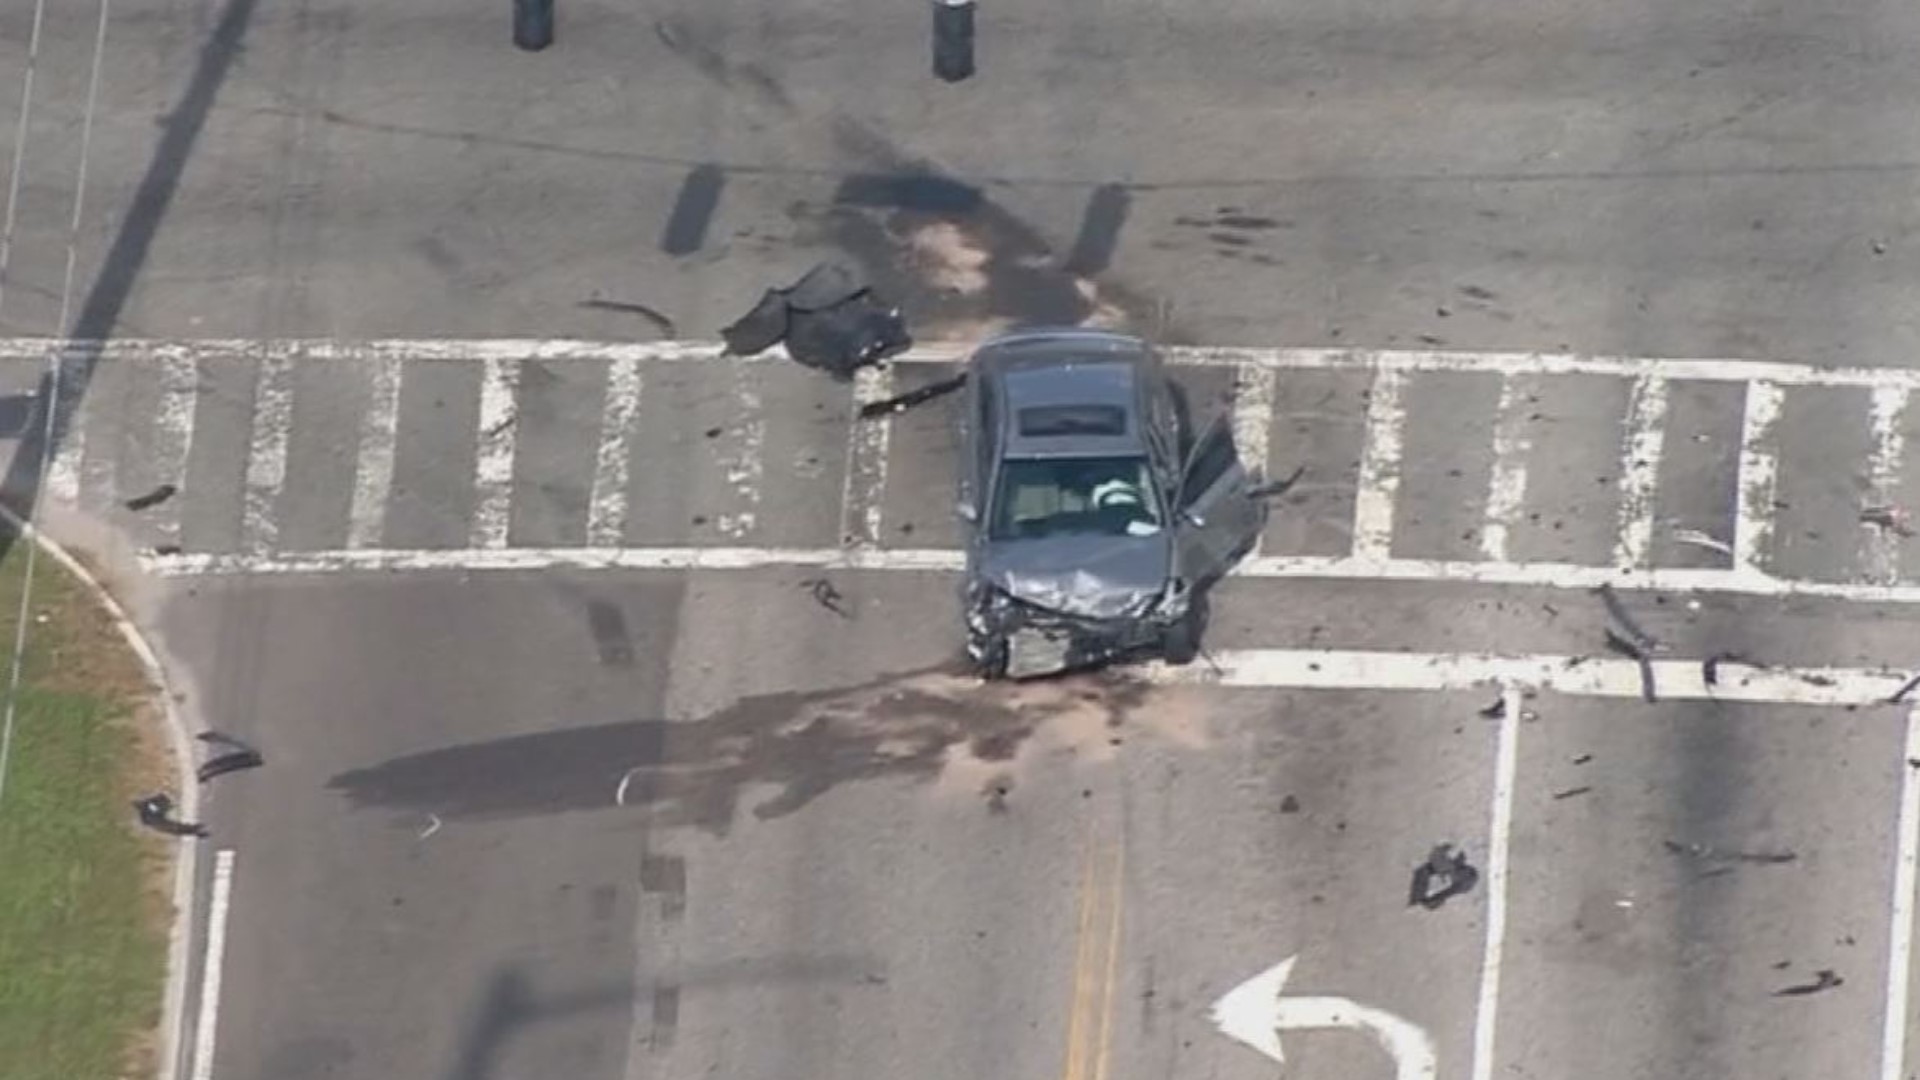 At least one person is dead after a crash in St. Petersburg, police said.

The crash happened just before 4 p.m. on Central Avenue near 58th Street when investigators say a black Mercedes struck an SUV.